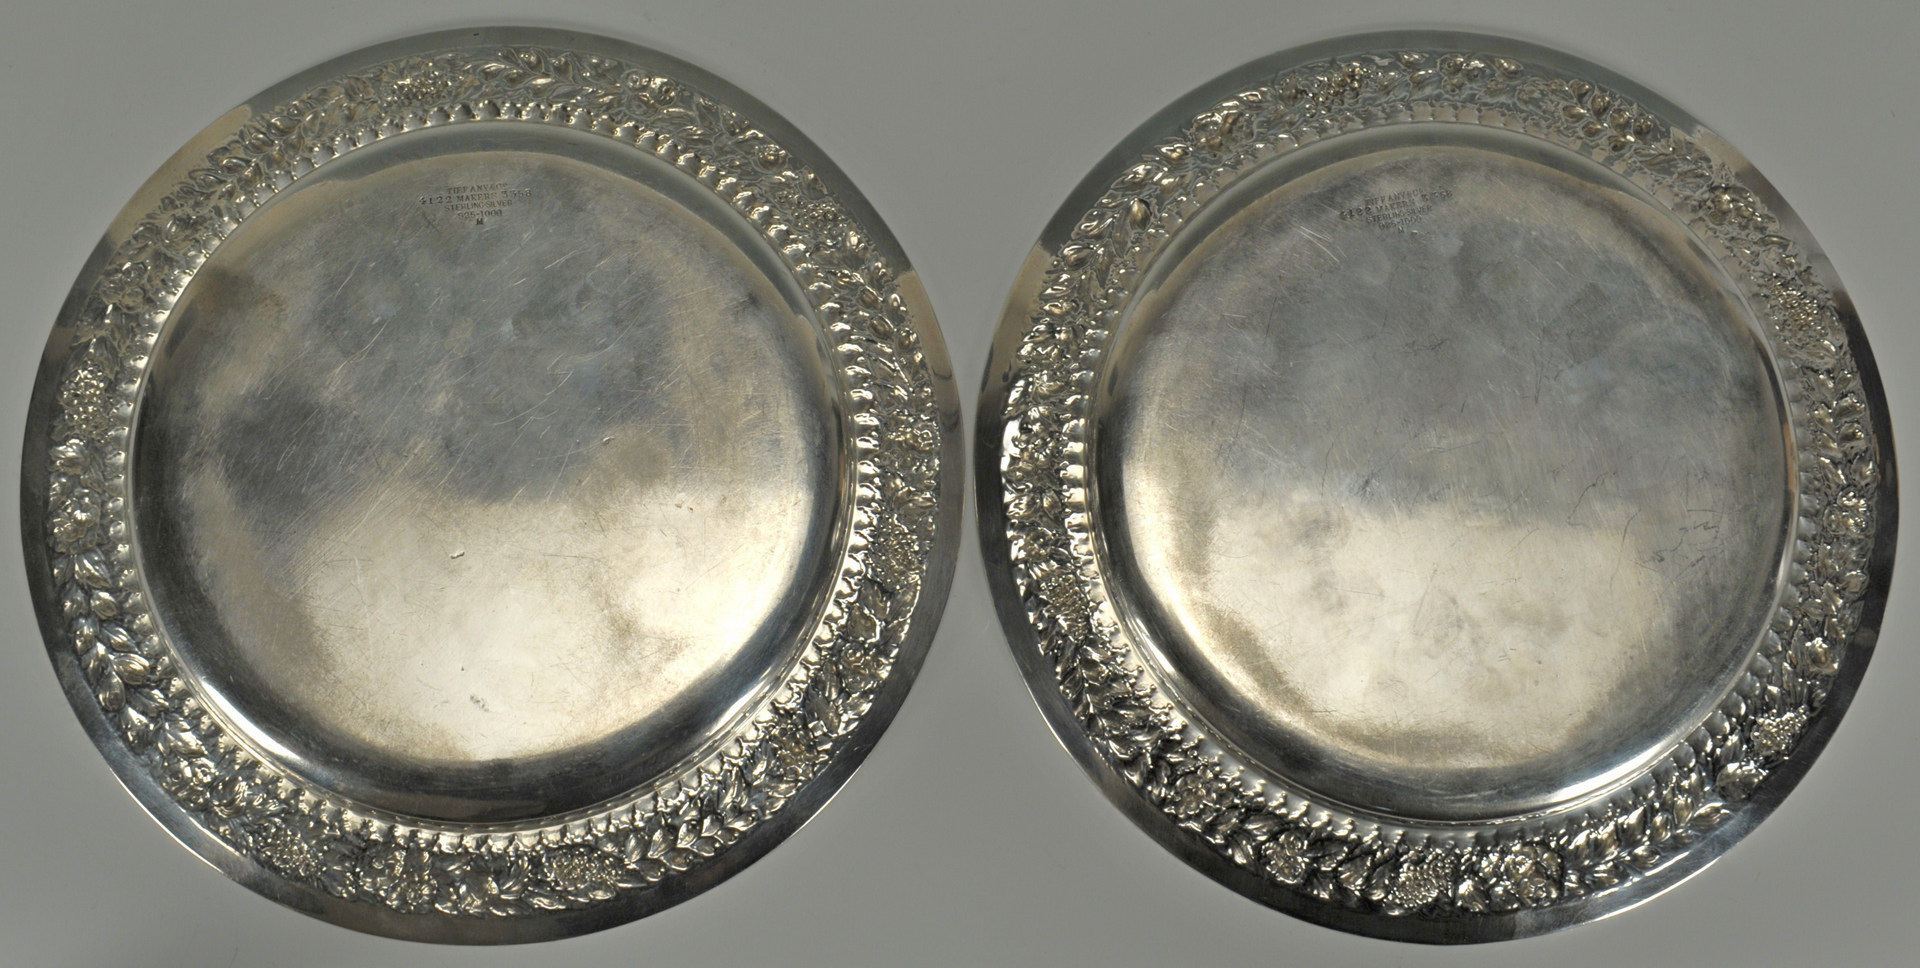 Lot 57: Pair of Tiffany Sterling Plates or Chargers